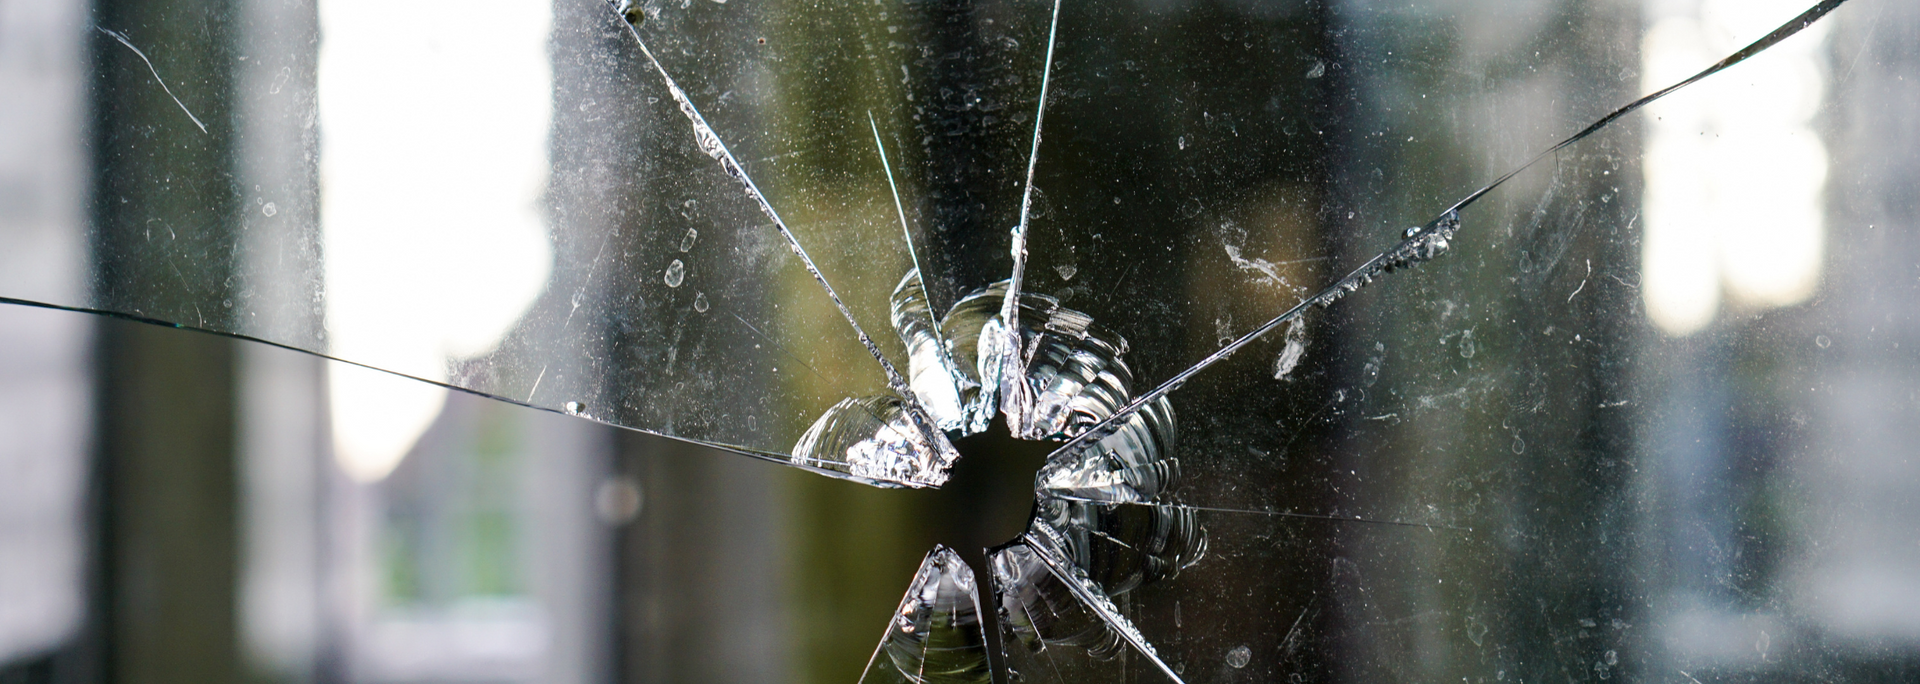 Picture of a broken glass window.